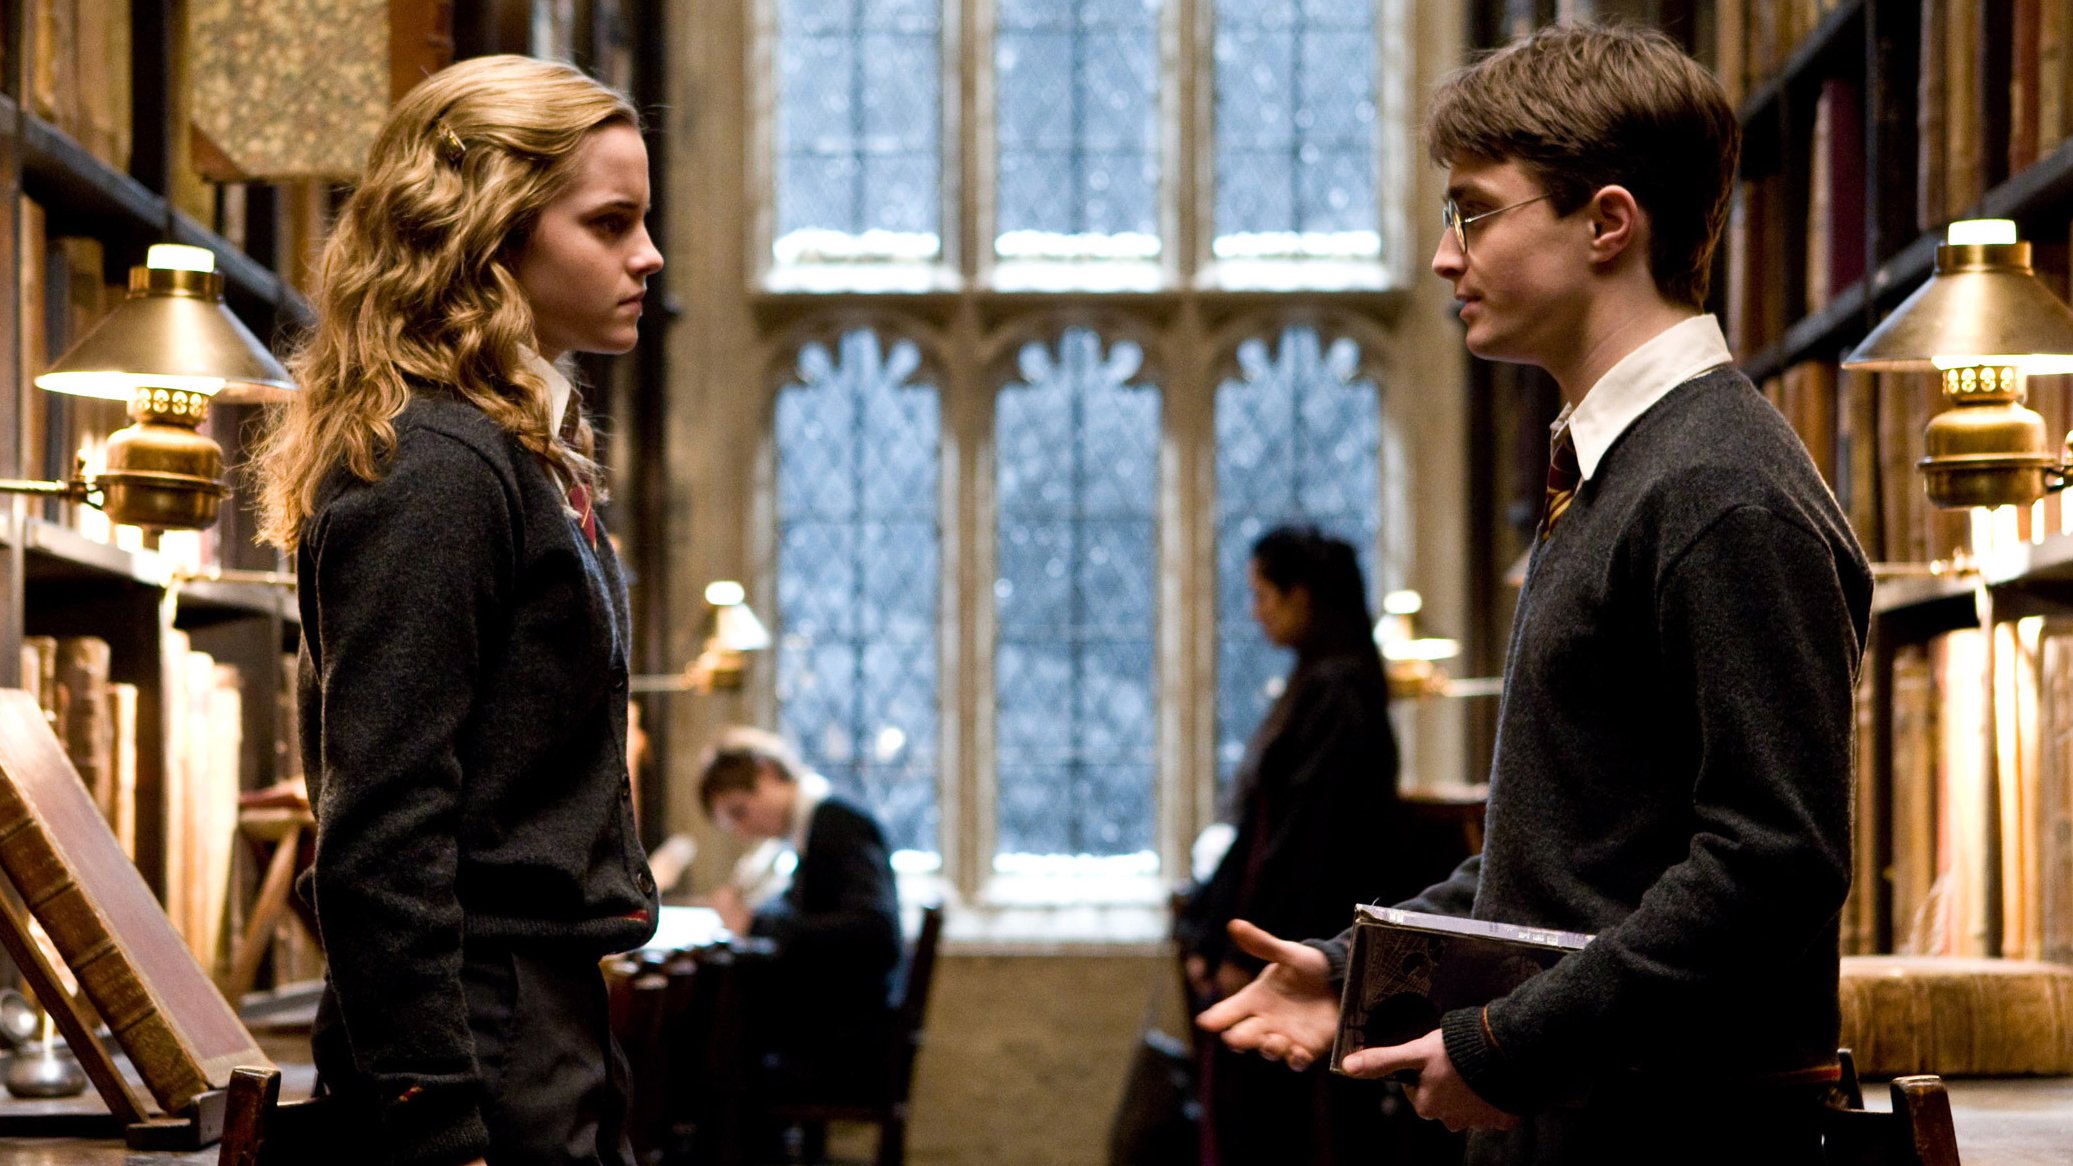 harry potter, movie, harry potter and the half blood prince, daniel radcliffe, emma watson, hermione granger